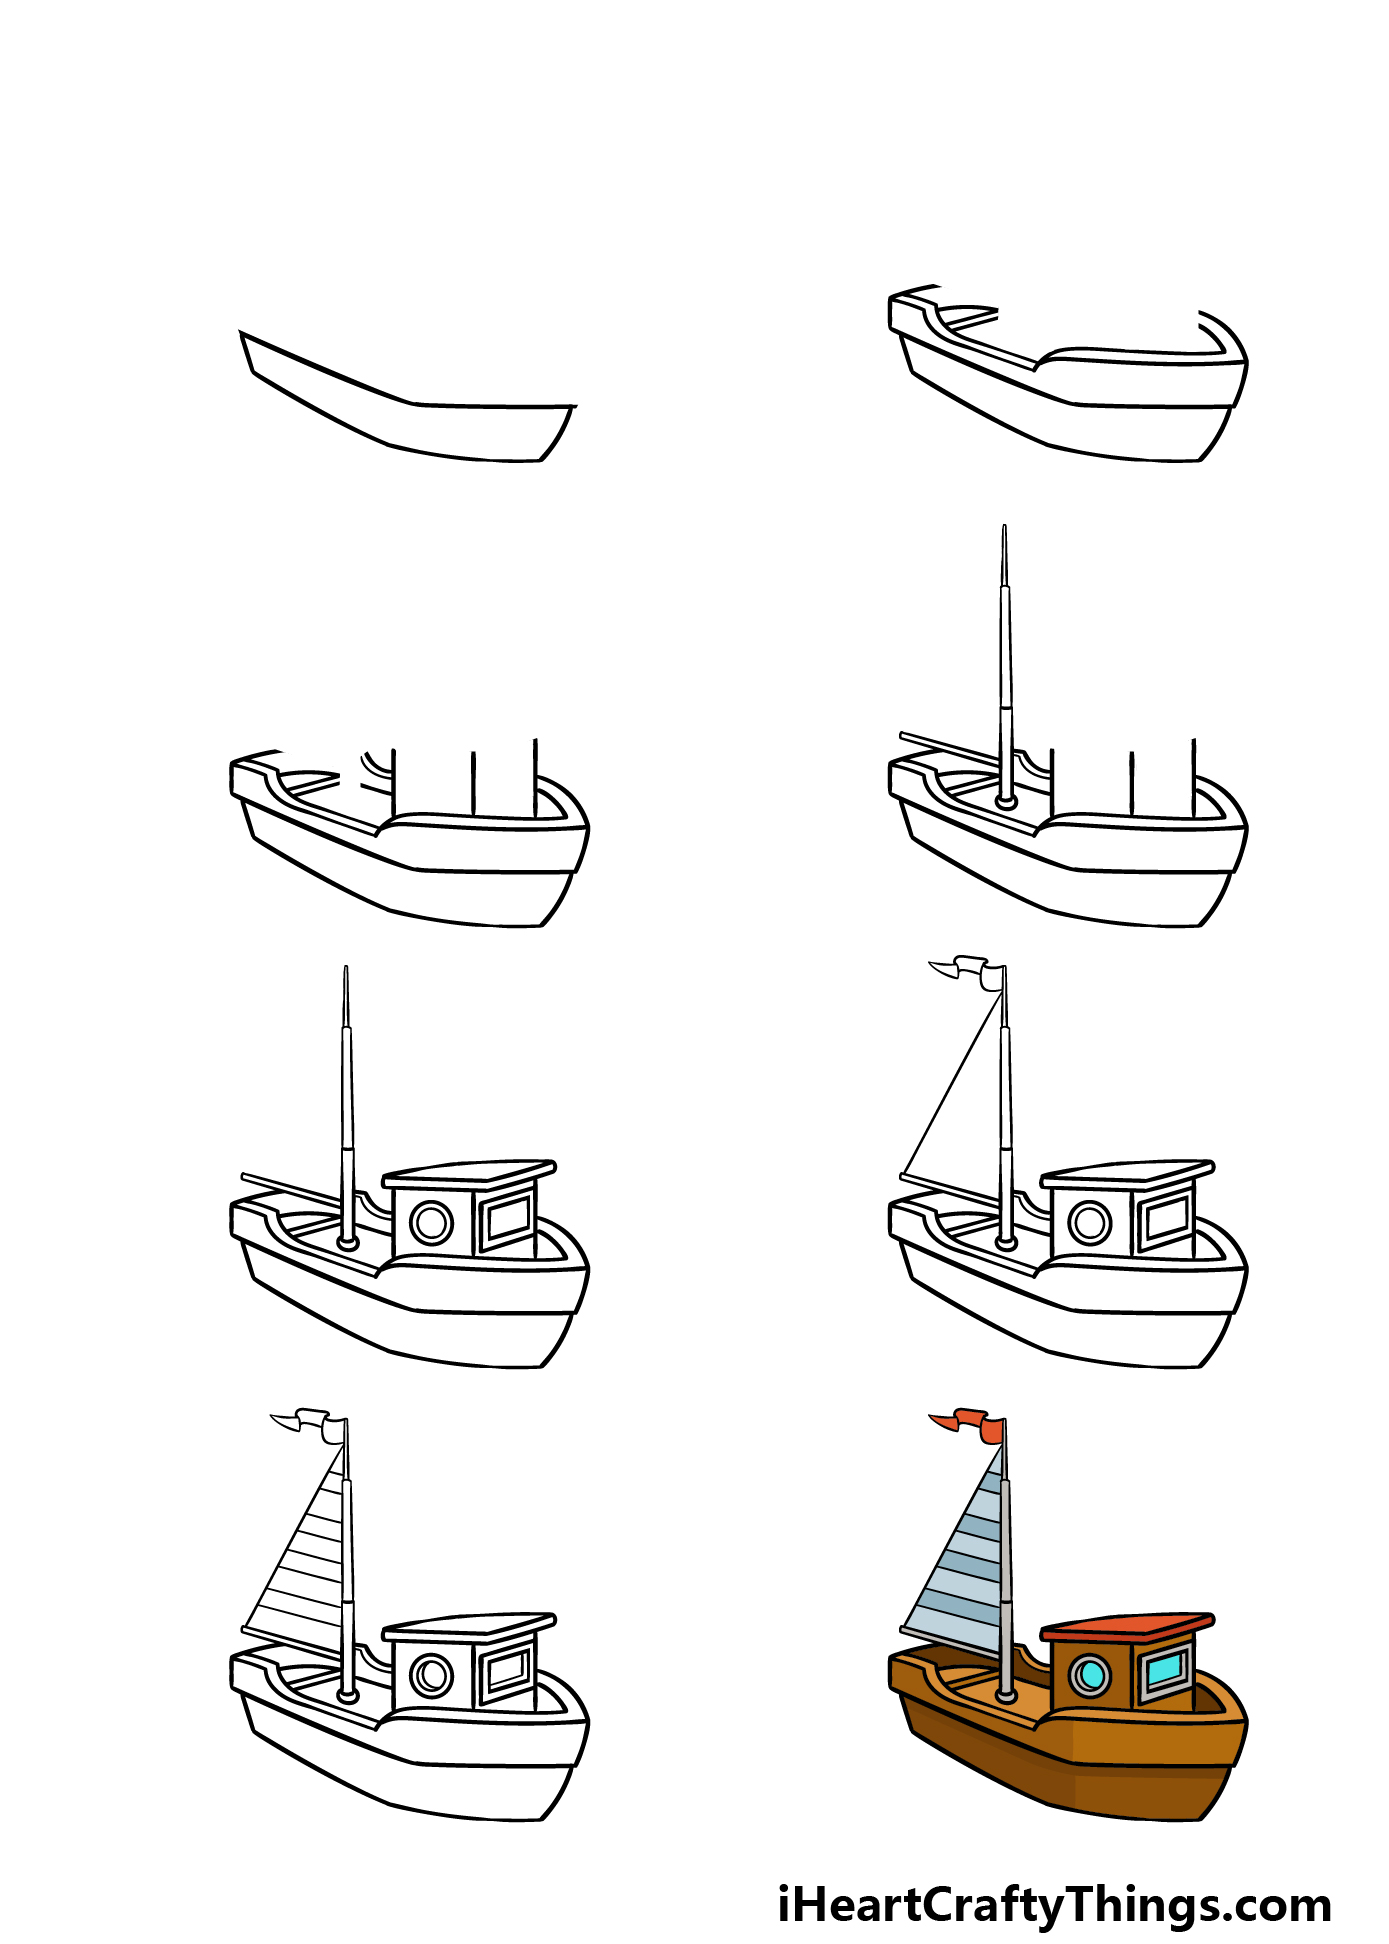 Cartoon Boat Drawing - How To Draw A Cartoon Boat Step By Step